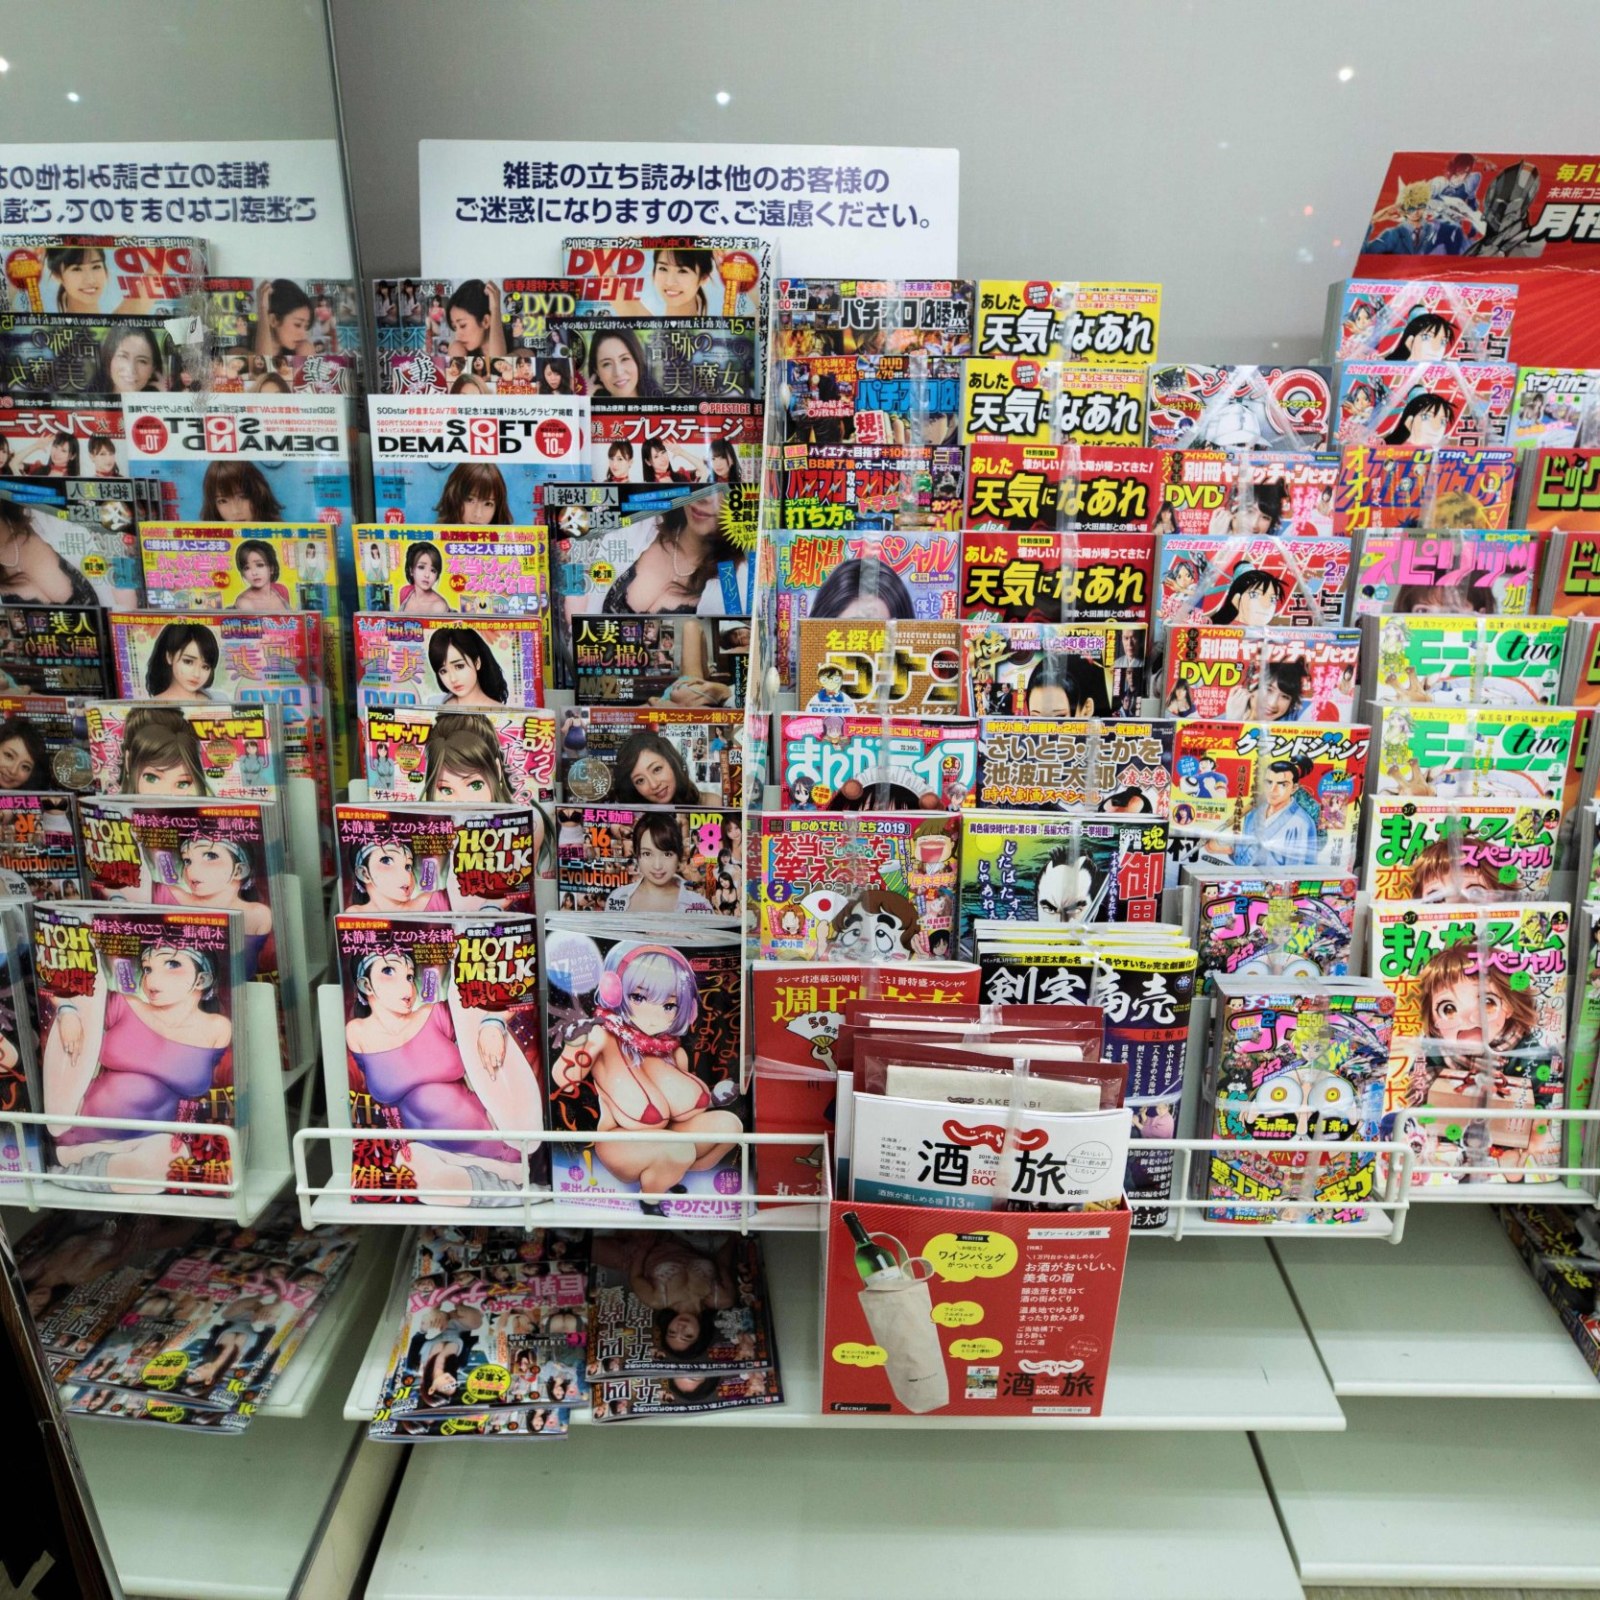 Japan Porno Magazine - 7-Eleven to Stop Selling Porn Magazines Ahead of Rugby World Cup and 2020  Olympic Games